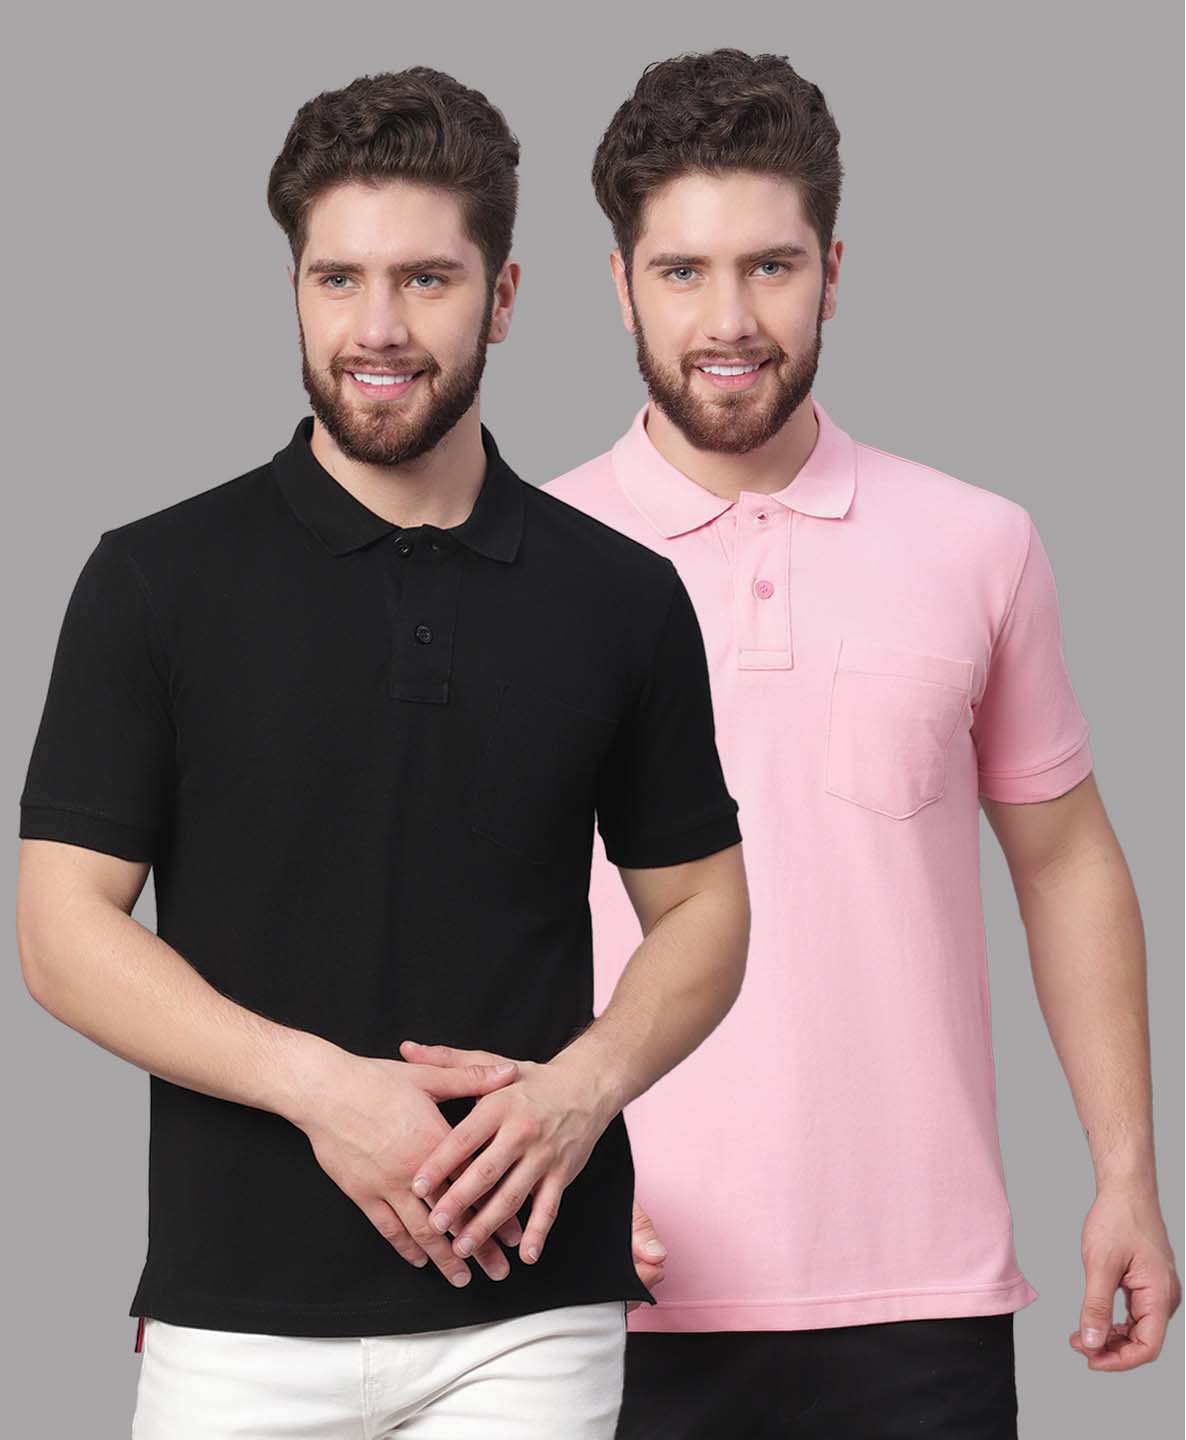 Men's Pack Of 2 Half Sleeves Solid Polo T-shirt - Friskers